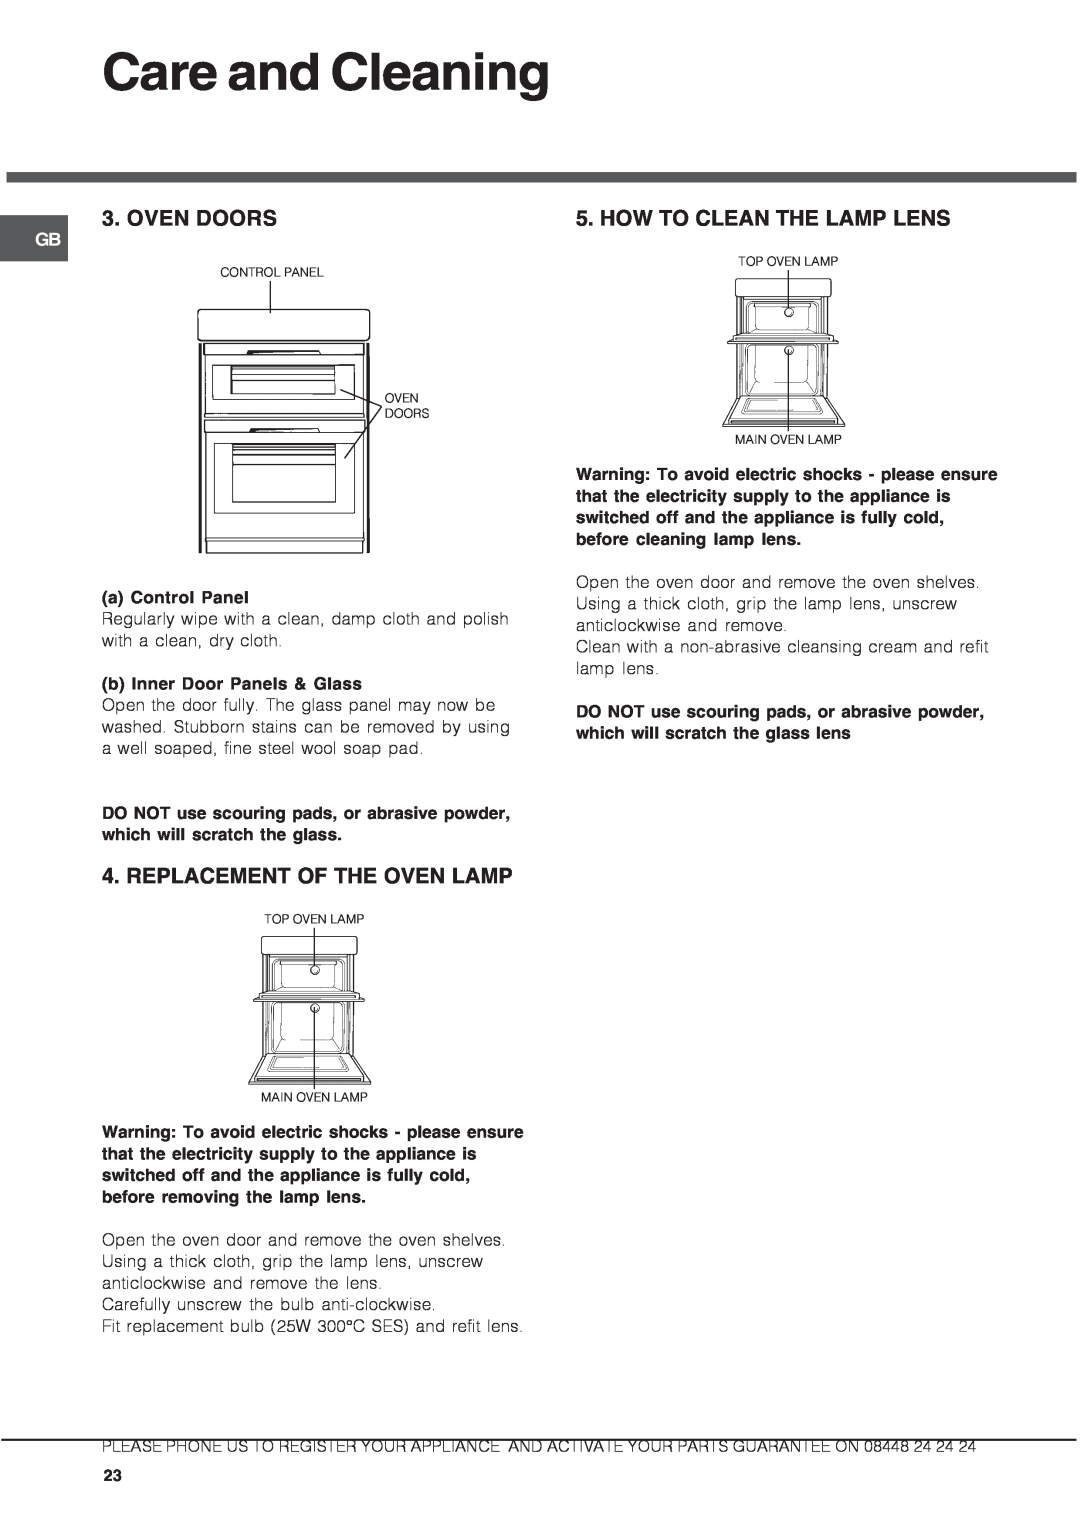 Hotpoint DX 1032 CX manual Care and Cleaning, Oven Doors, Replacement Of The Oven Lamp, How To Clean The Lamp Lens 